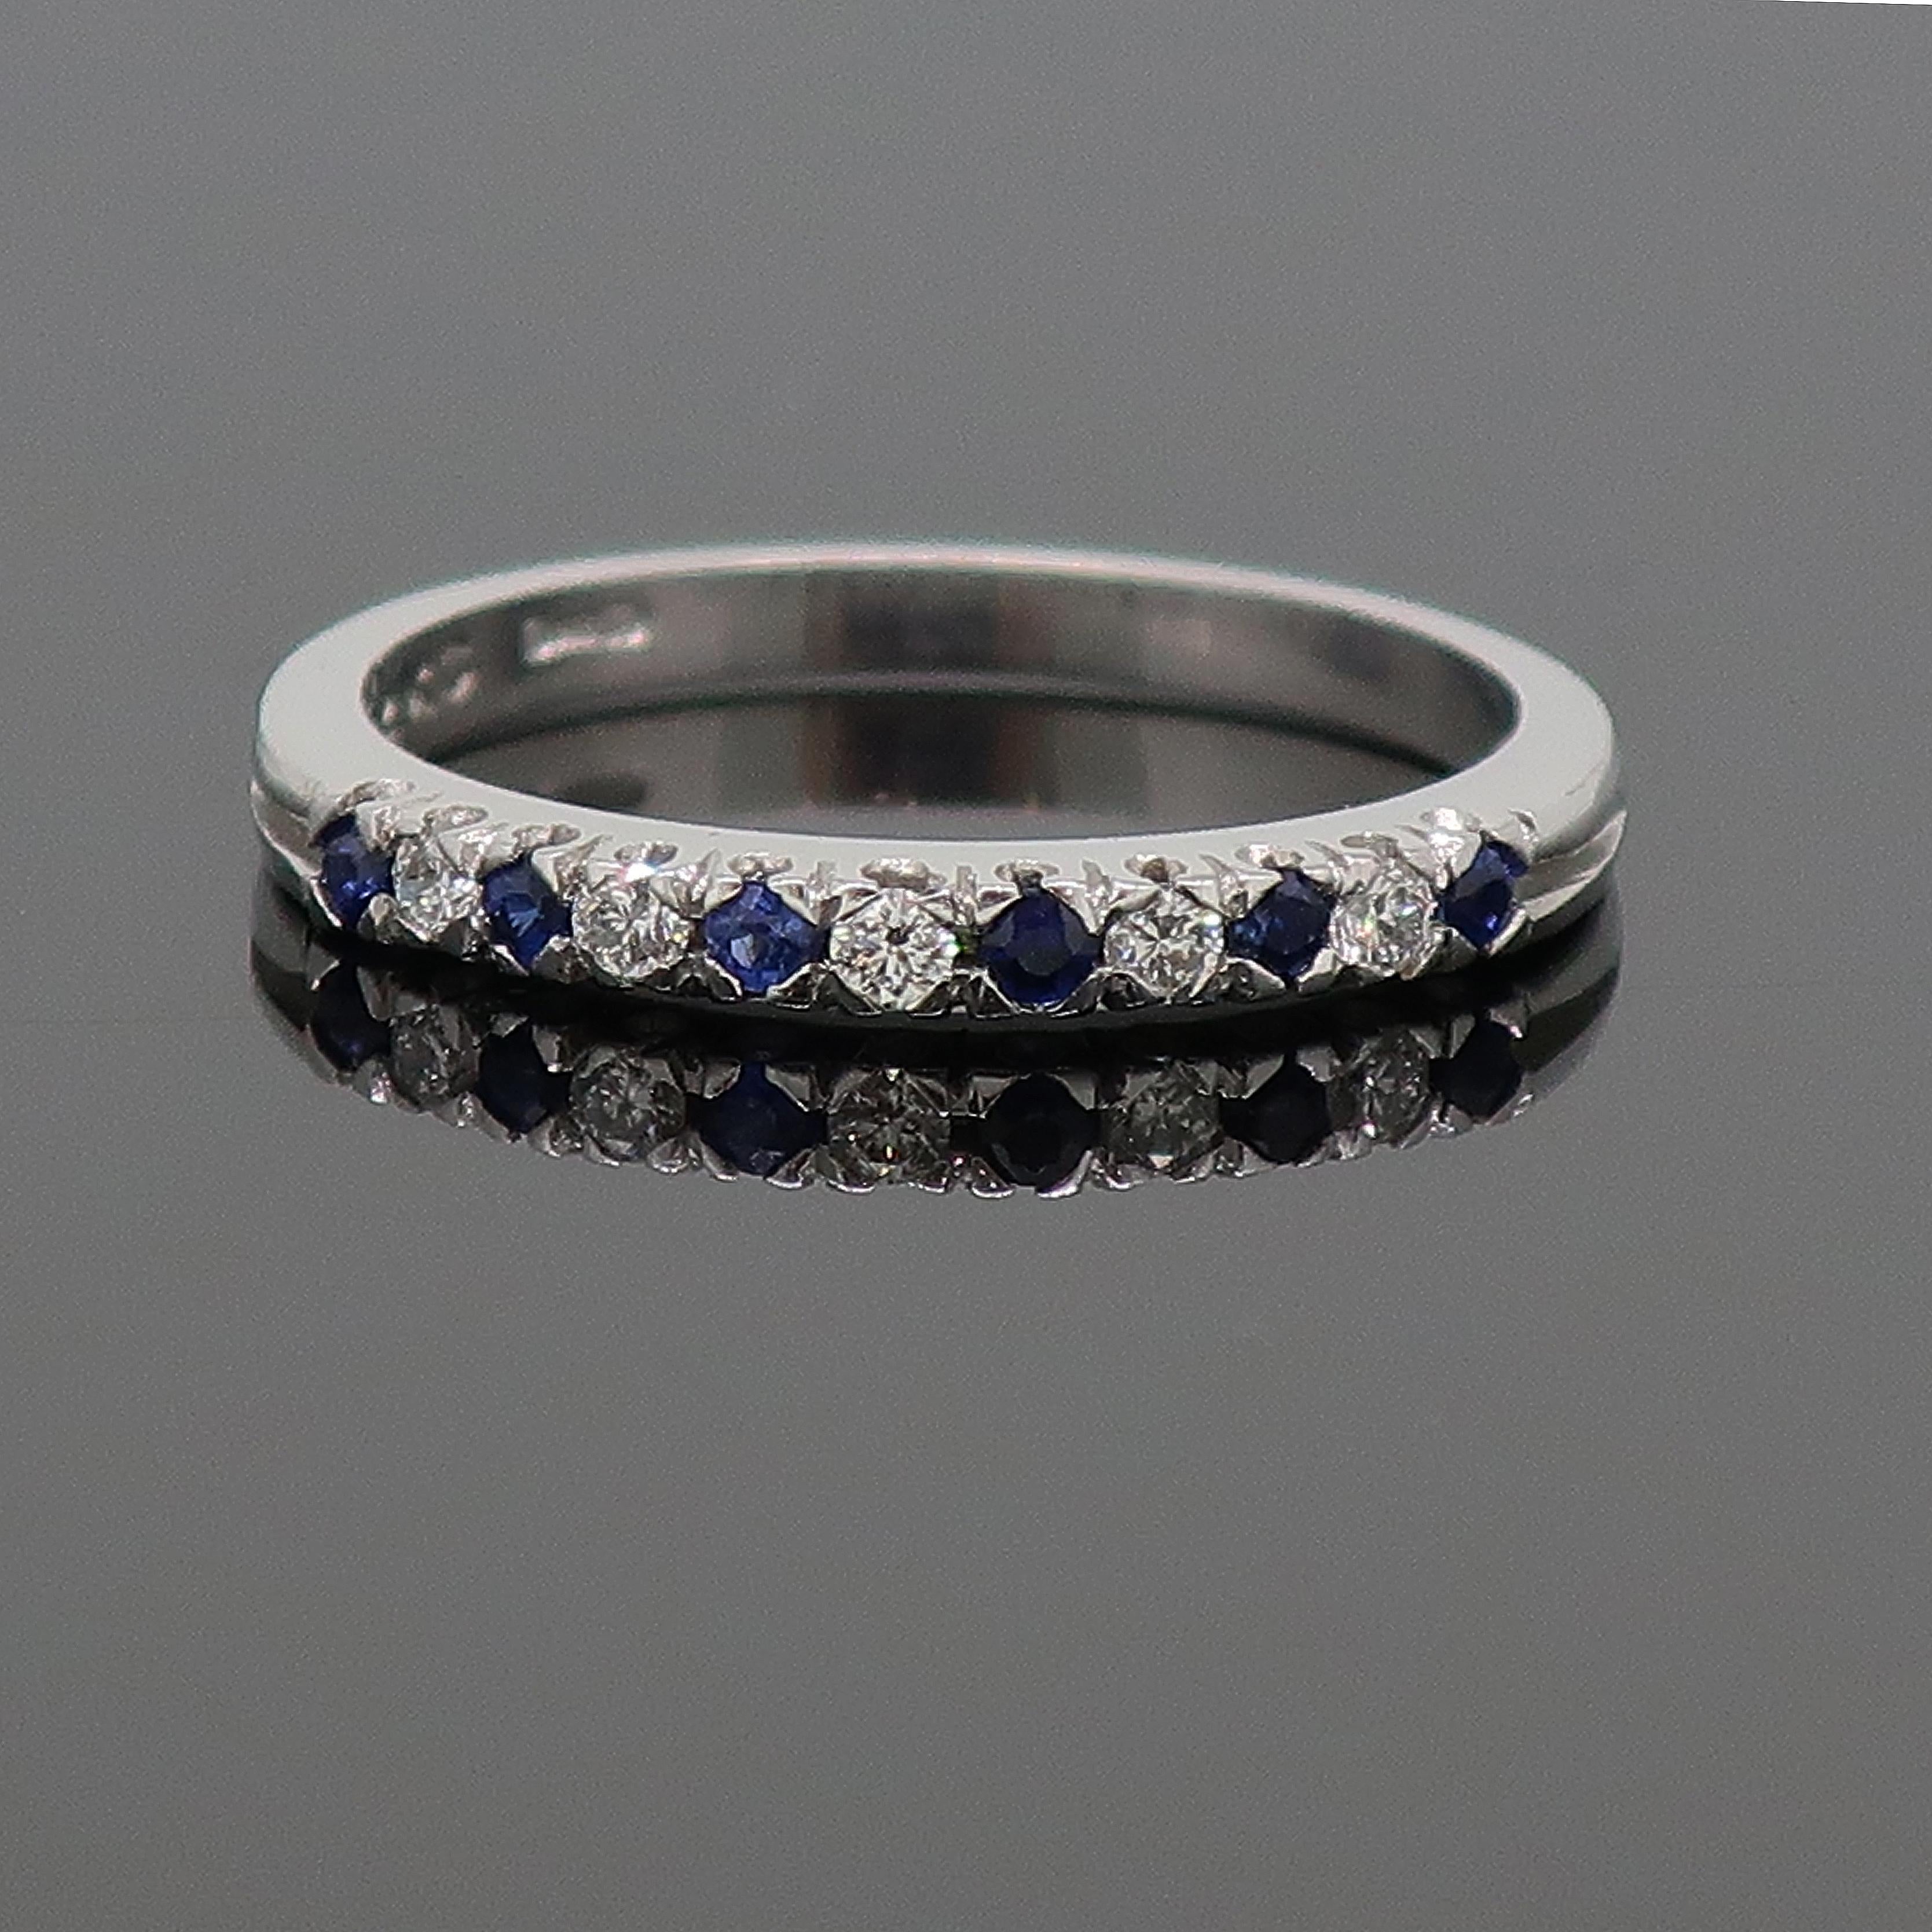 18 Karat Sapphire And Diamond Eternity Band Ring White Gold

A delicate and dainty eleven stone sapphire and diamond eternity ring. The ring consists of six round sapphires and five round brilliant cut diamonds in a corner claw coronet style